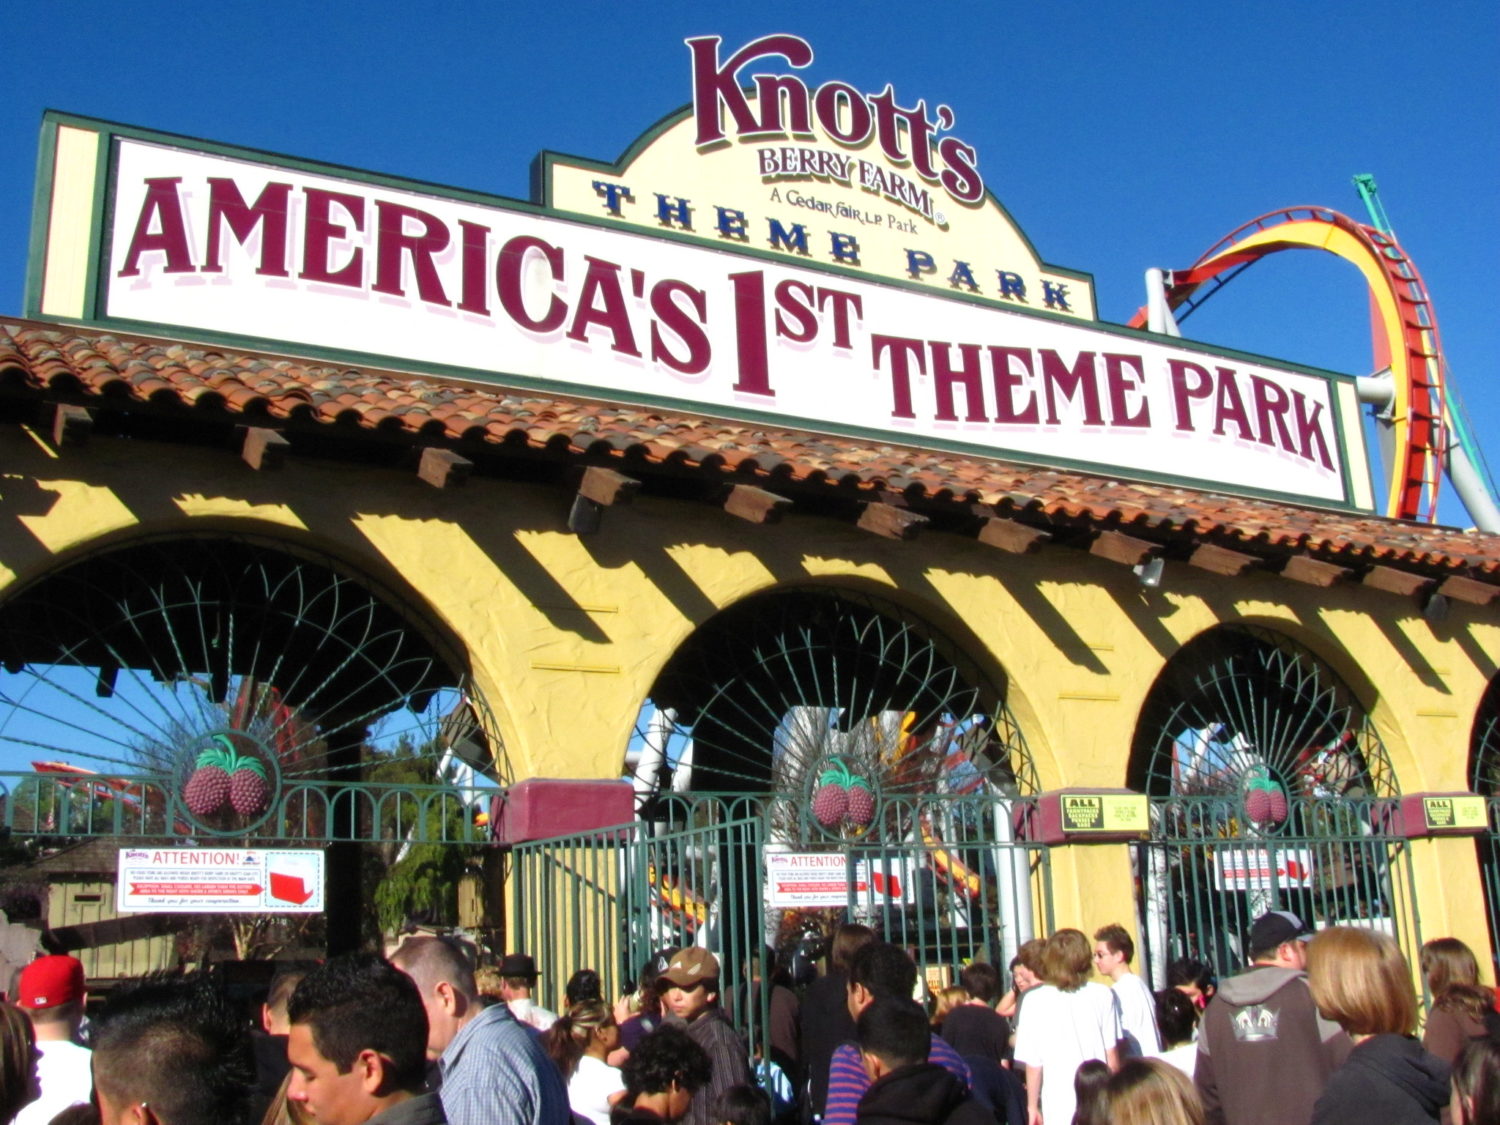 Knott's Announces Chaperone Policy After Fights Shut Down Park